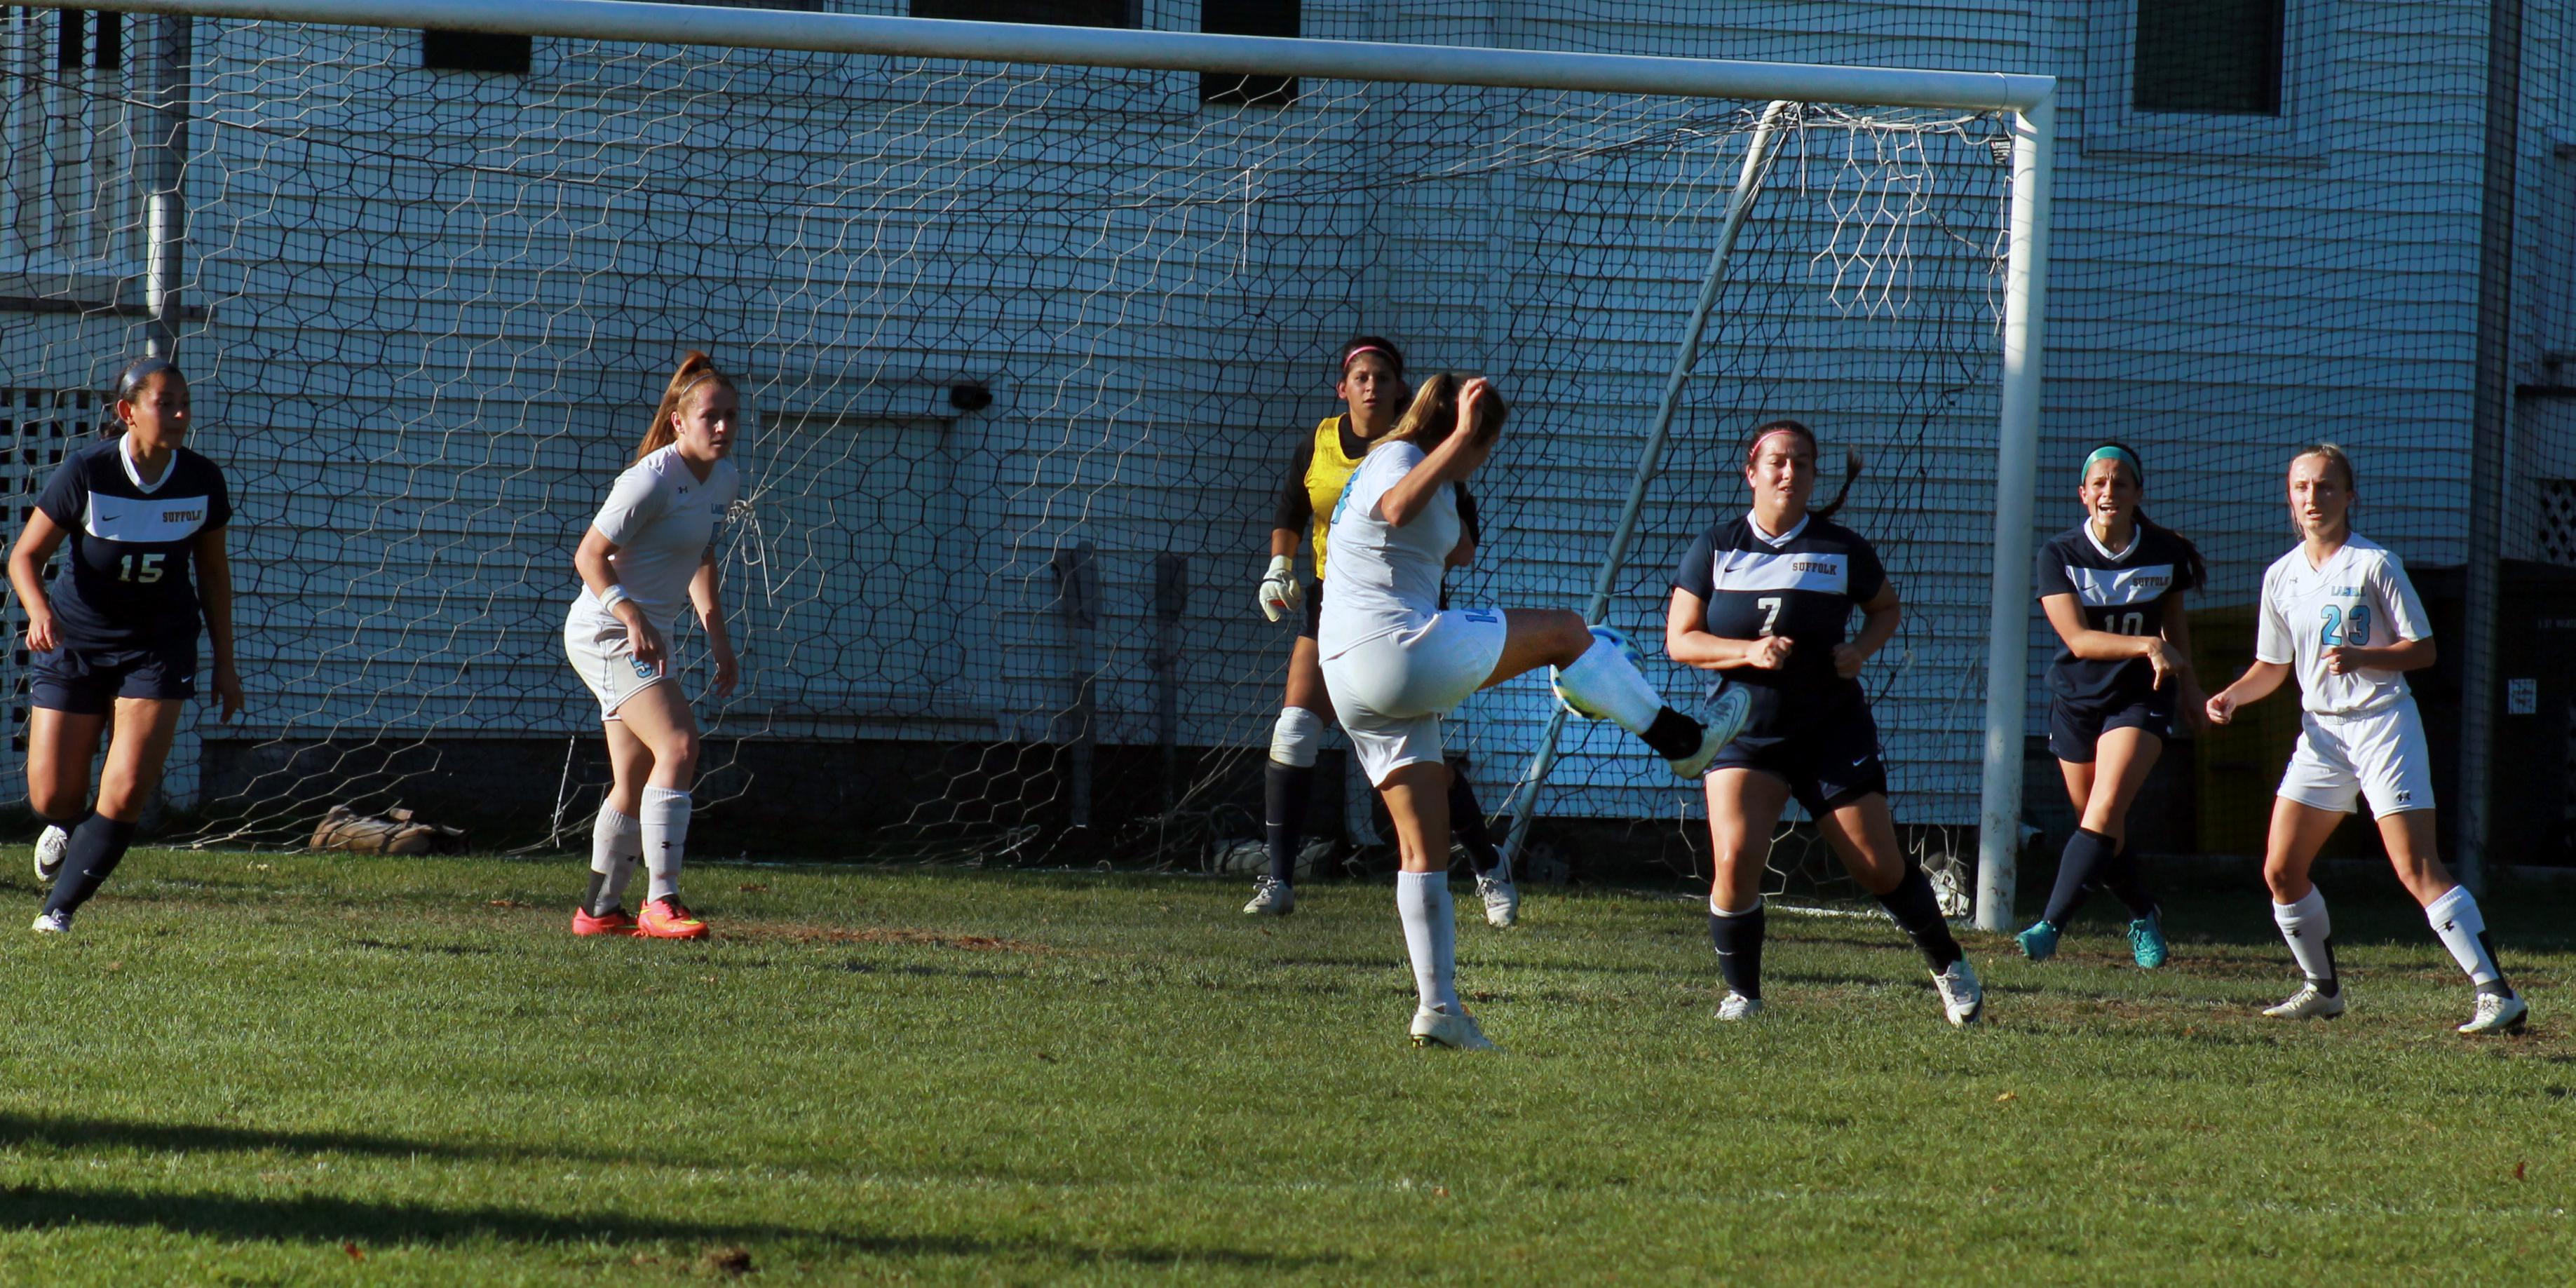 Day and Cullen Goals Propel Lasell Past Suffolk 2-1 in Women's Soccer